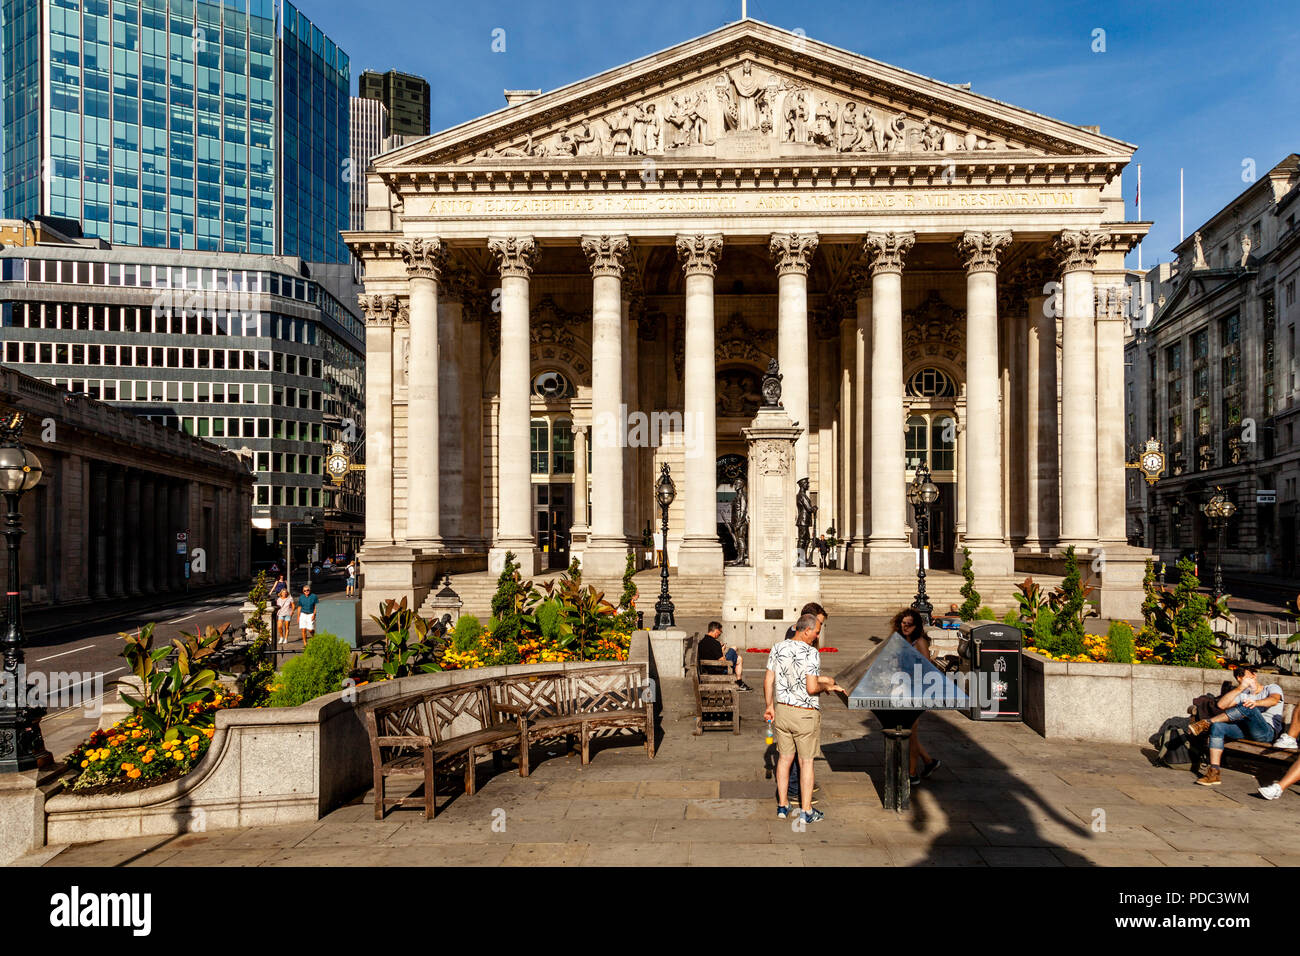 The Royal Exchange Building, The City Of London, London, England Stock Photo